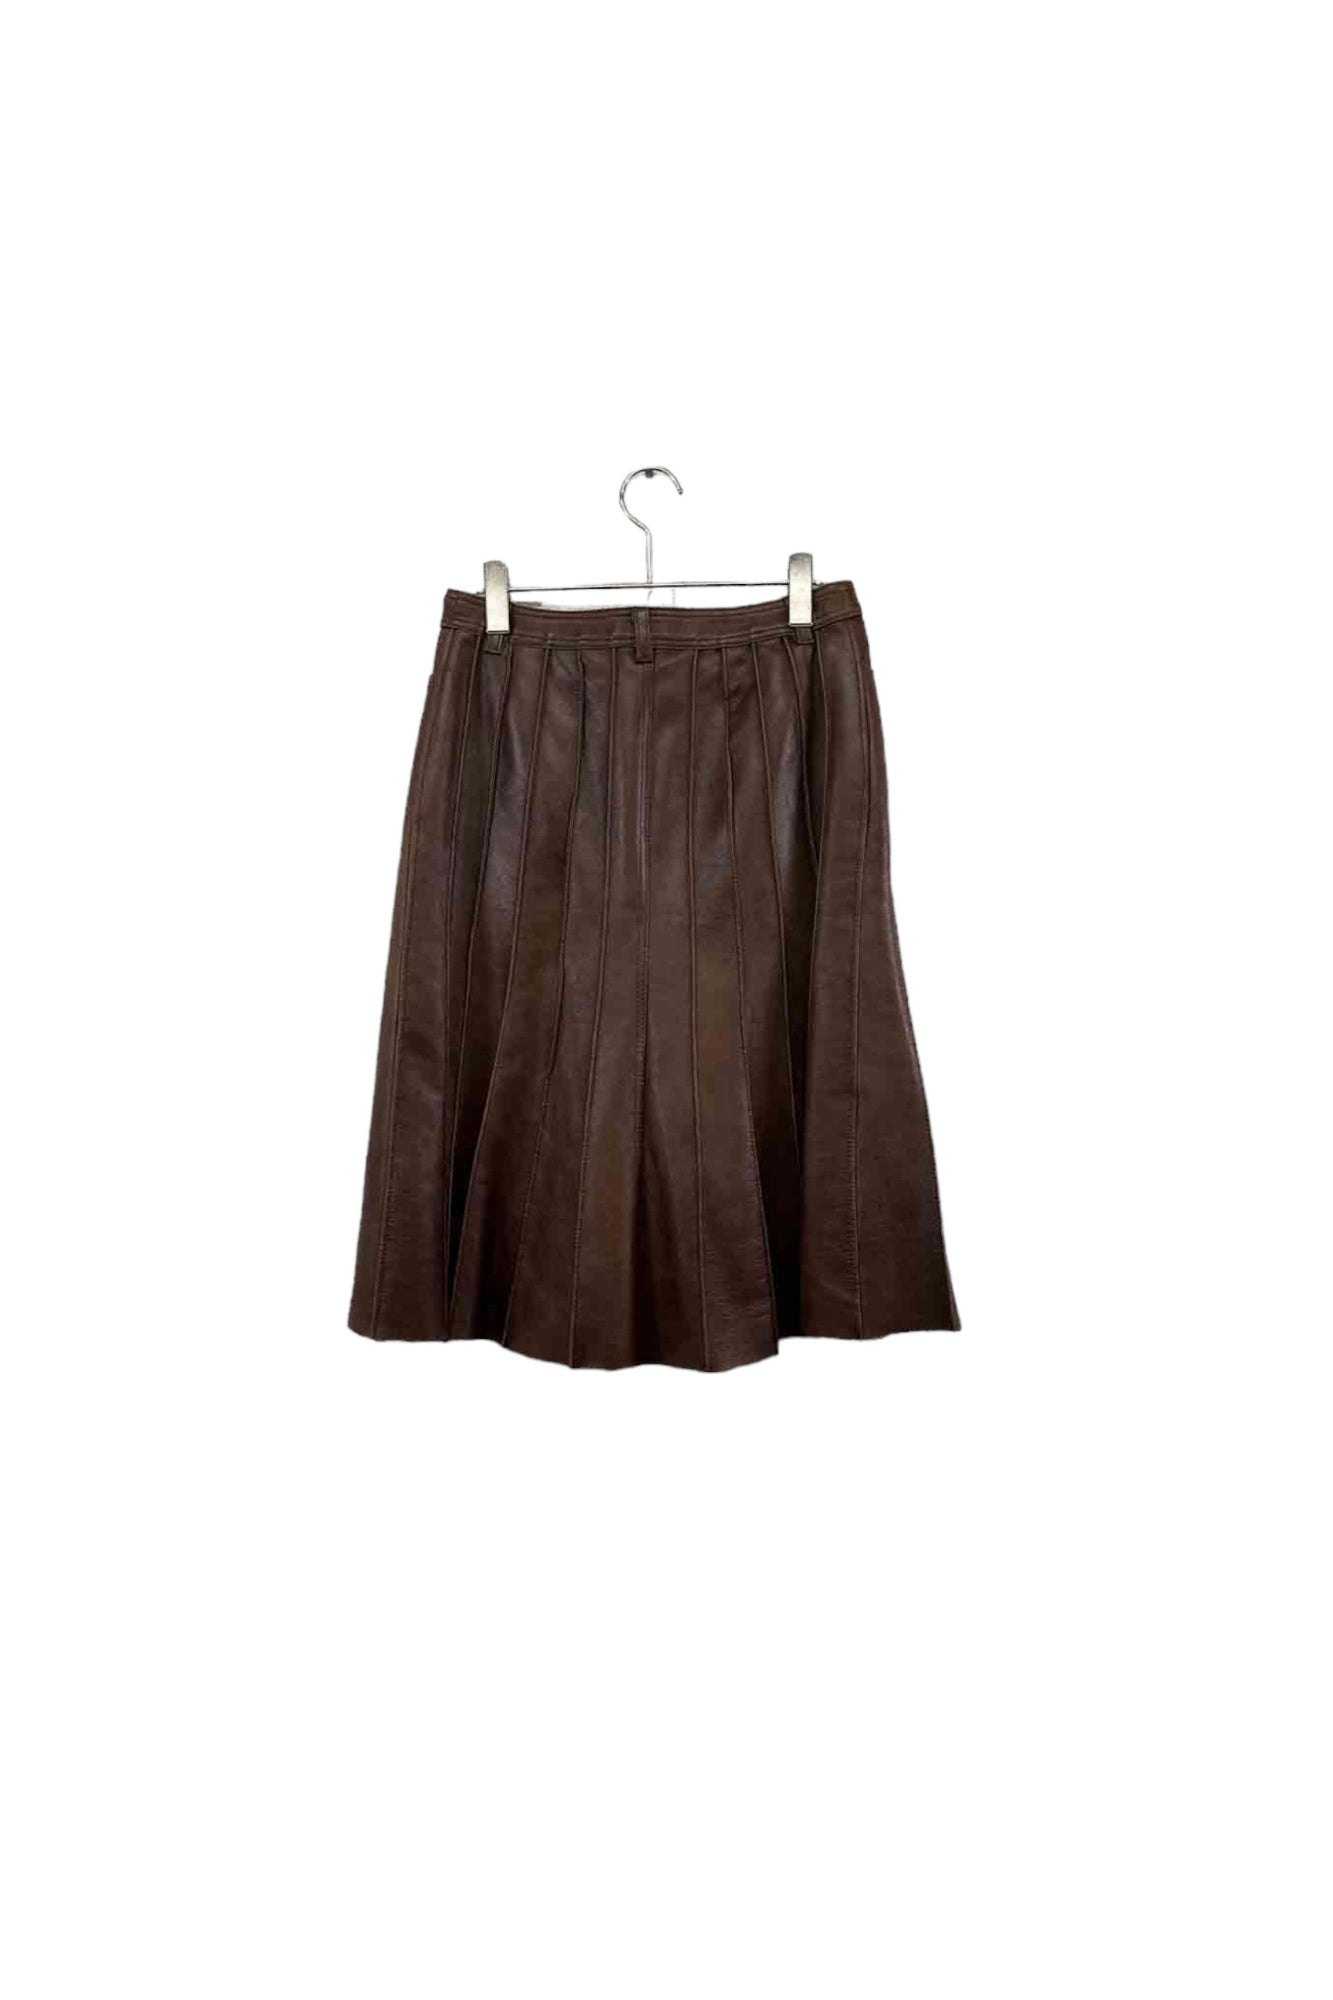 GRACE CONTINENTAL brown leather skirt